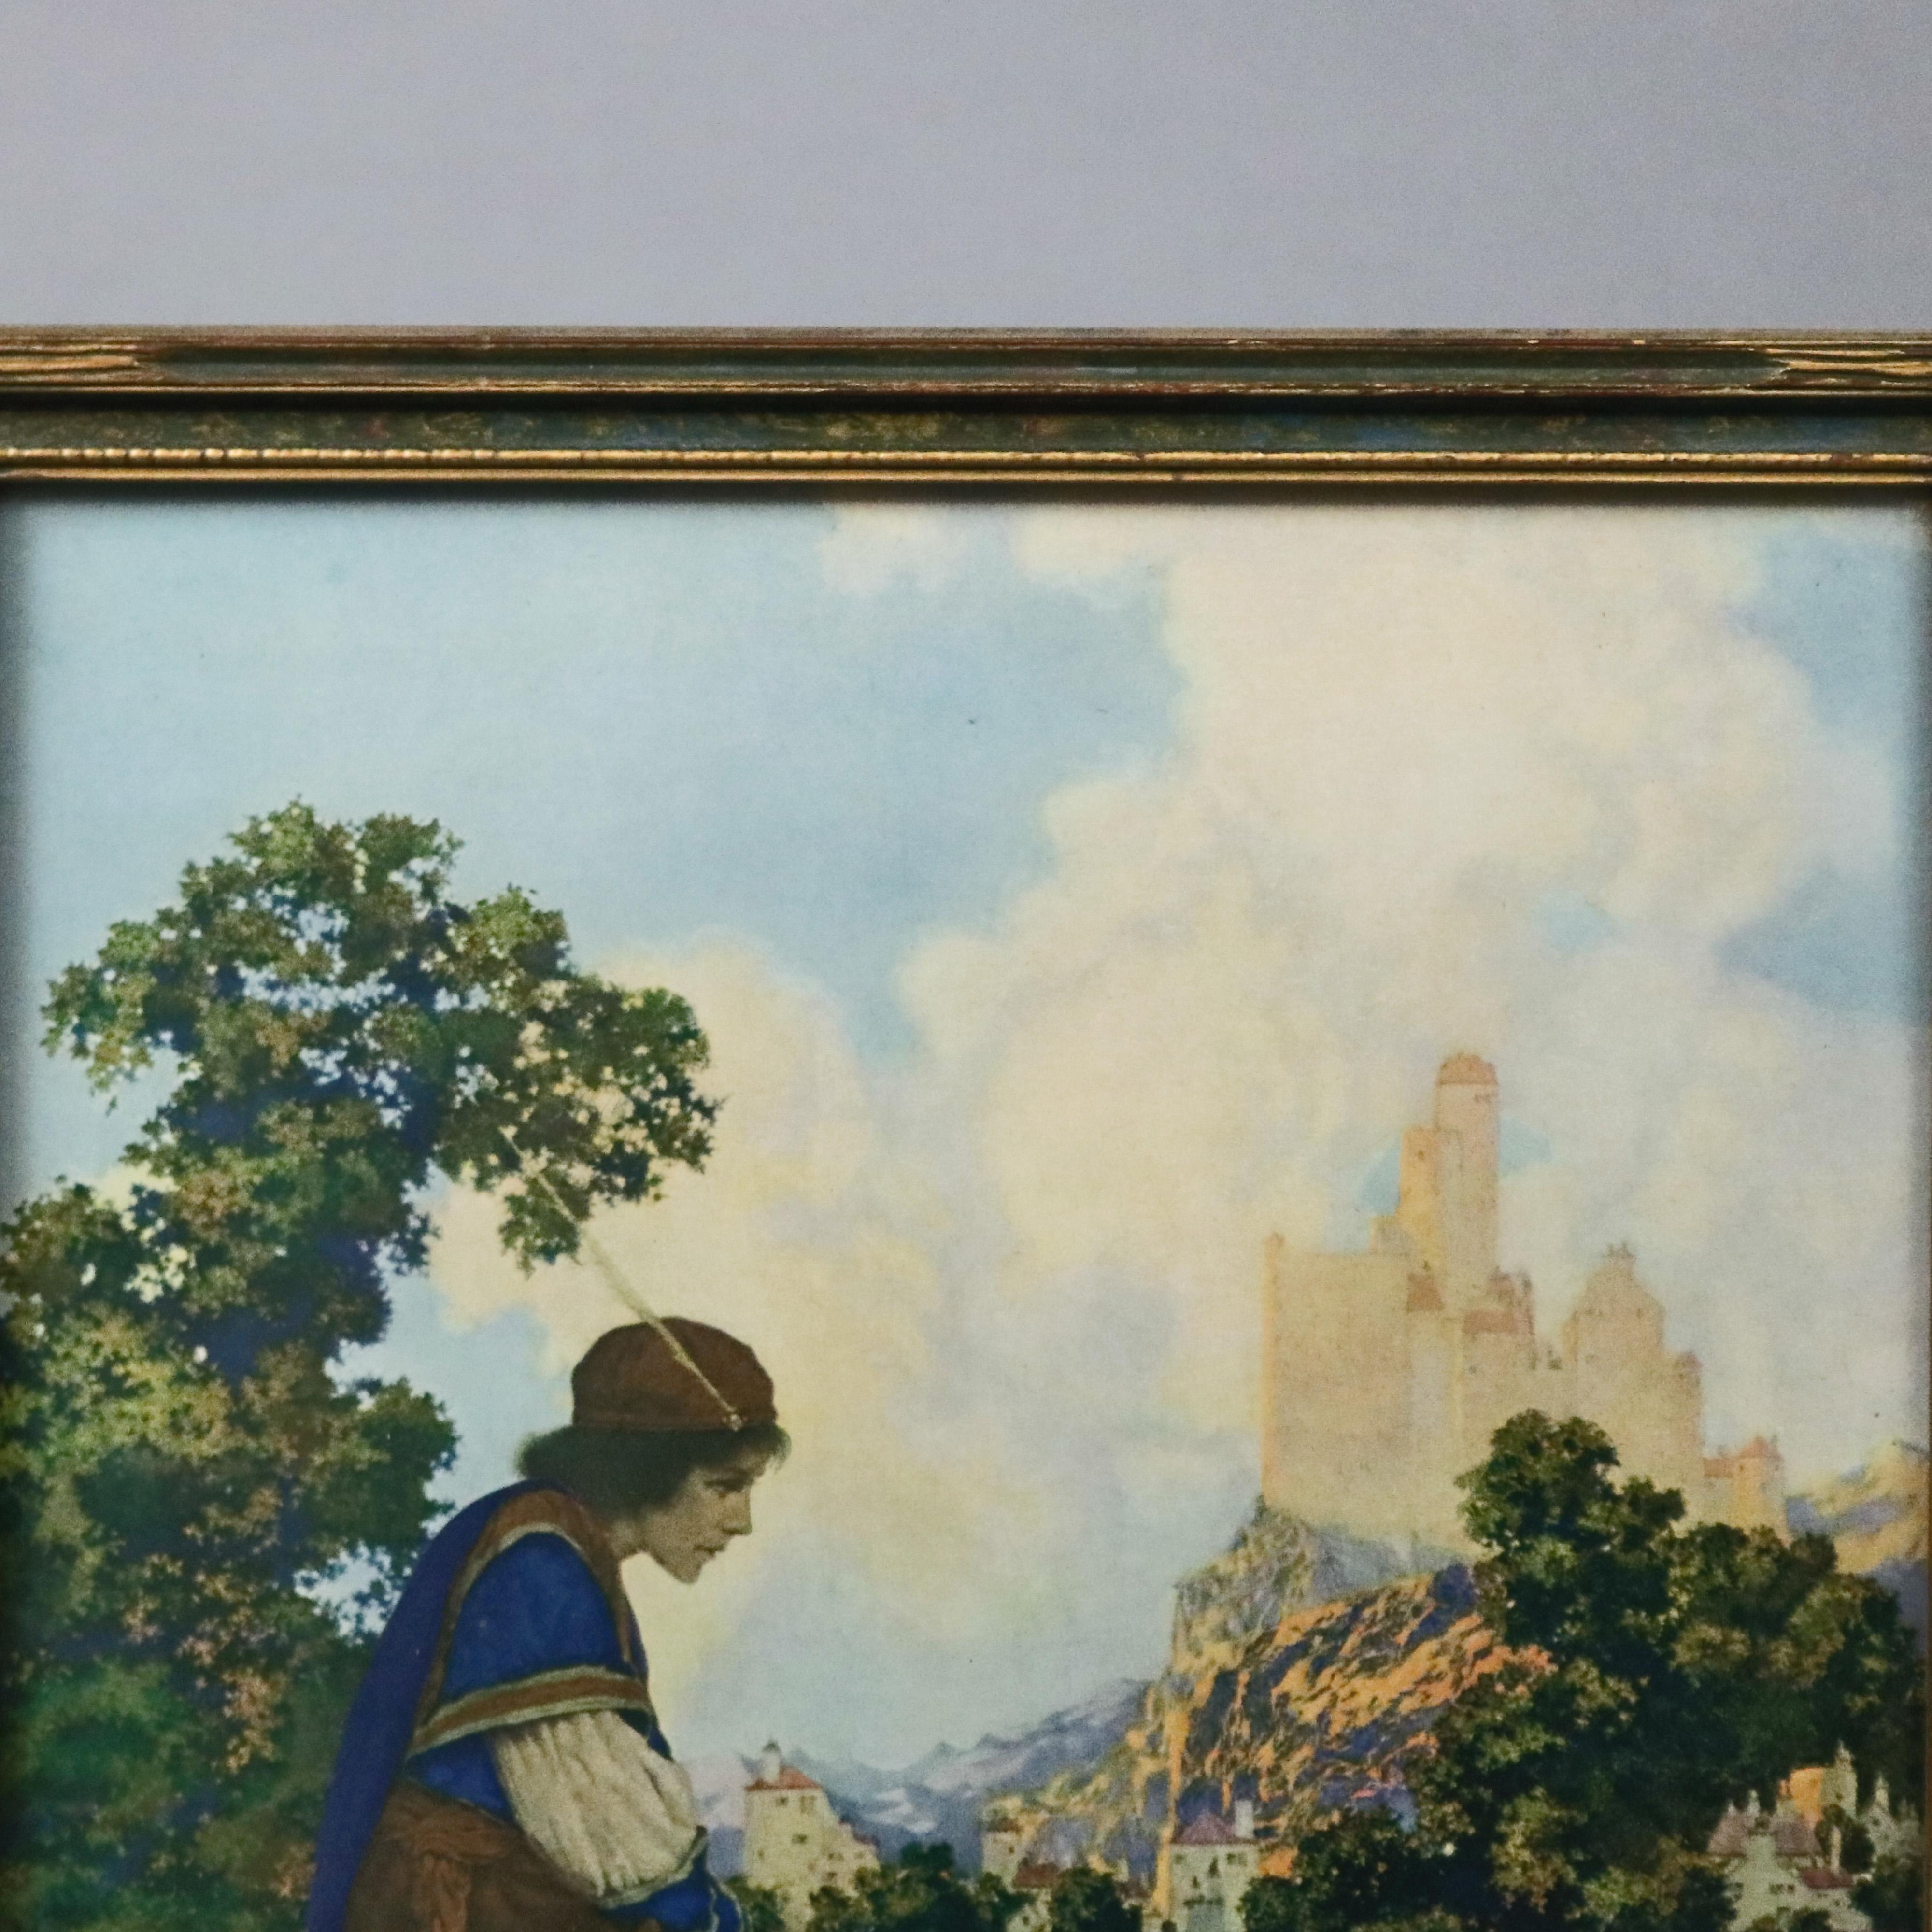 Painted Art Deco Antique Print 'The Prince' after Original by Maxfield Parrish, Framed